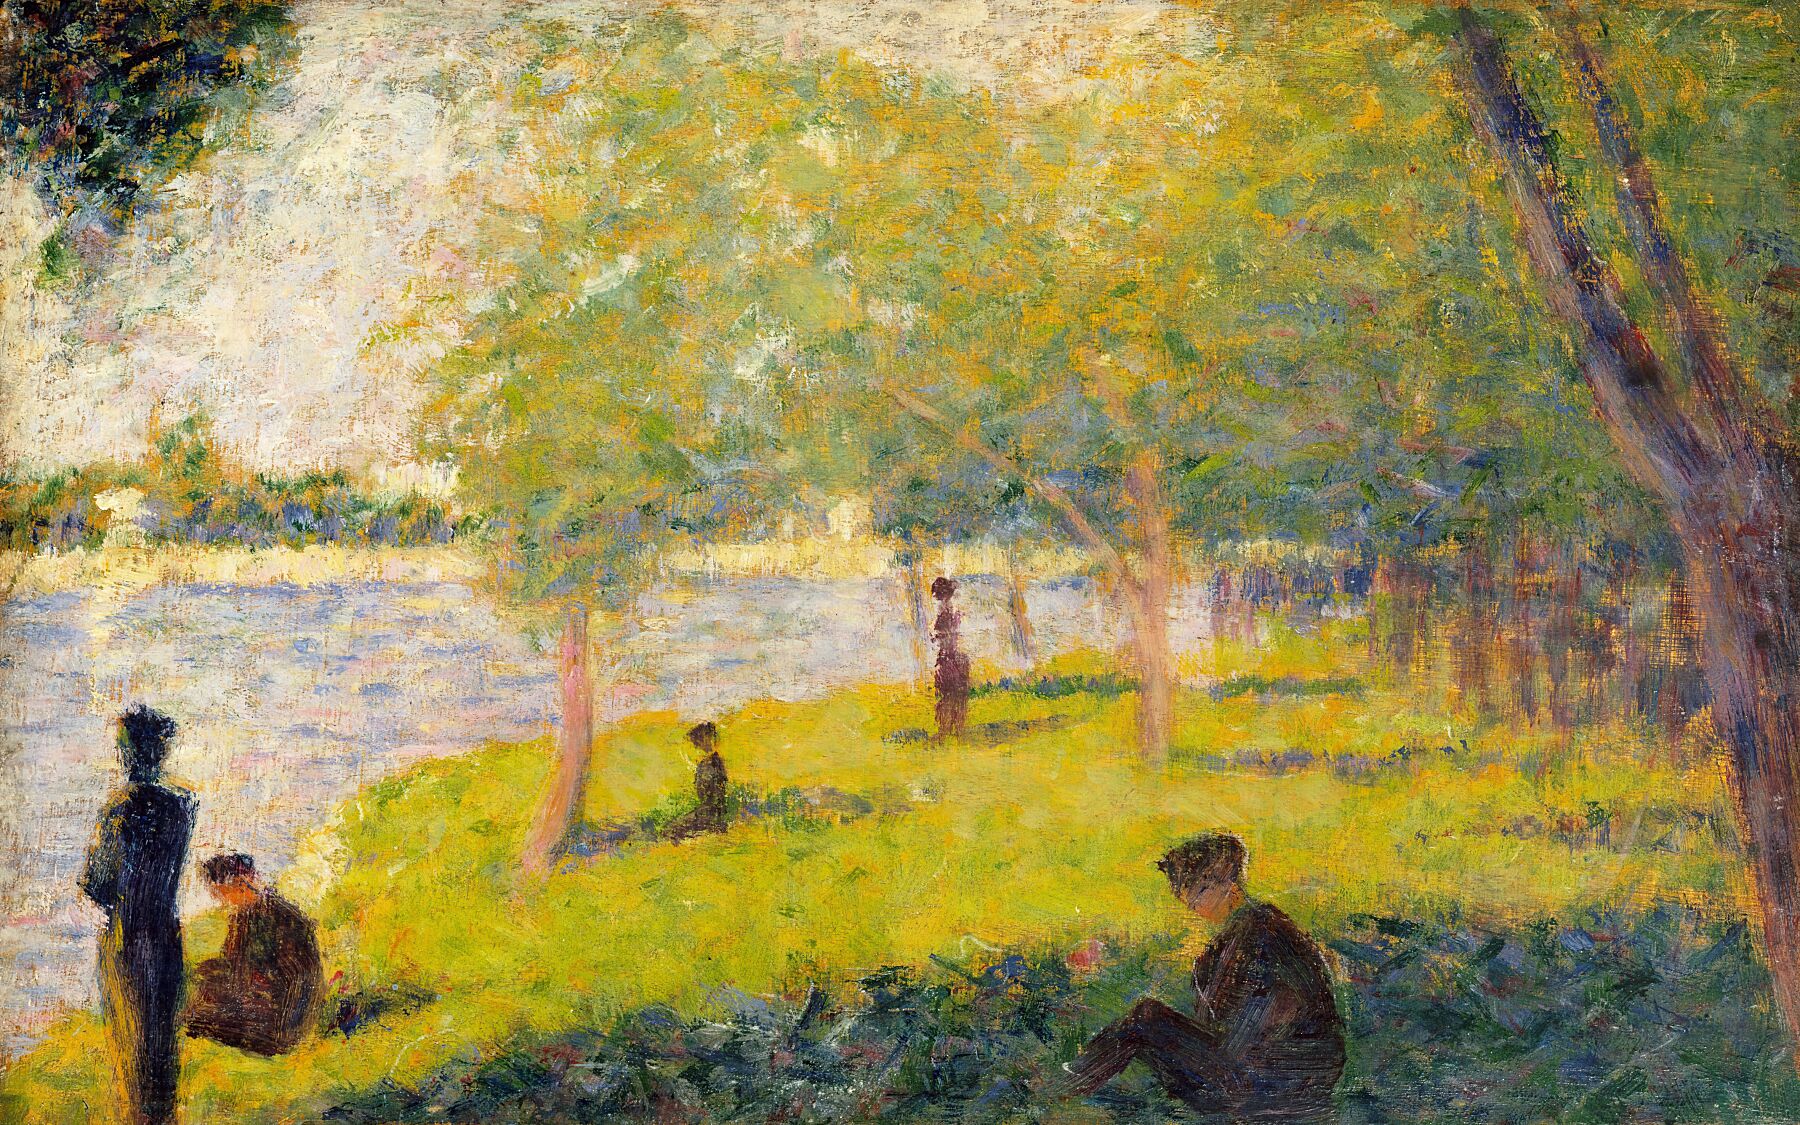 Study for a Sunday on La Grande Jatte by Georges Seurat - 1884